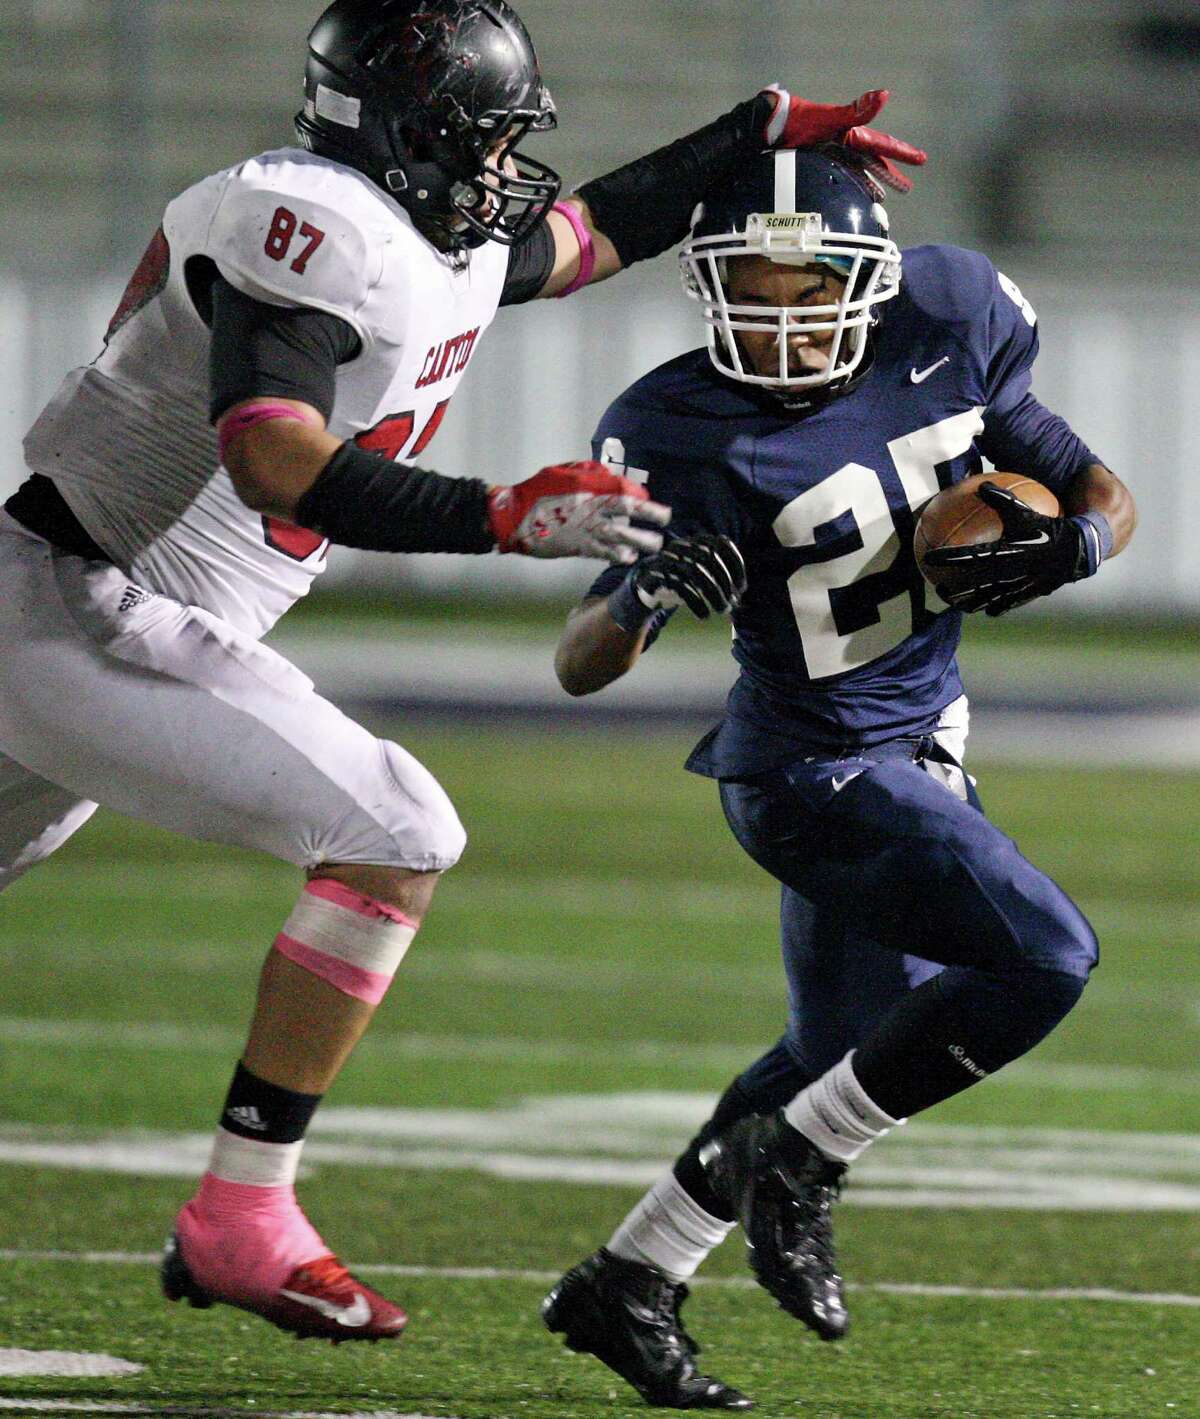 Smithson Valley's Cameron Jones looks for running room around New Braunfels Canyon's Ernest Gonzales during first half action Friday Oct. 26, 2012 at Ranger Stadium in Spring Branch, Tx.